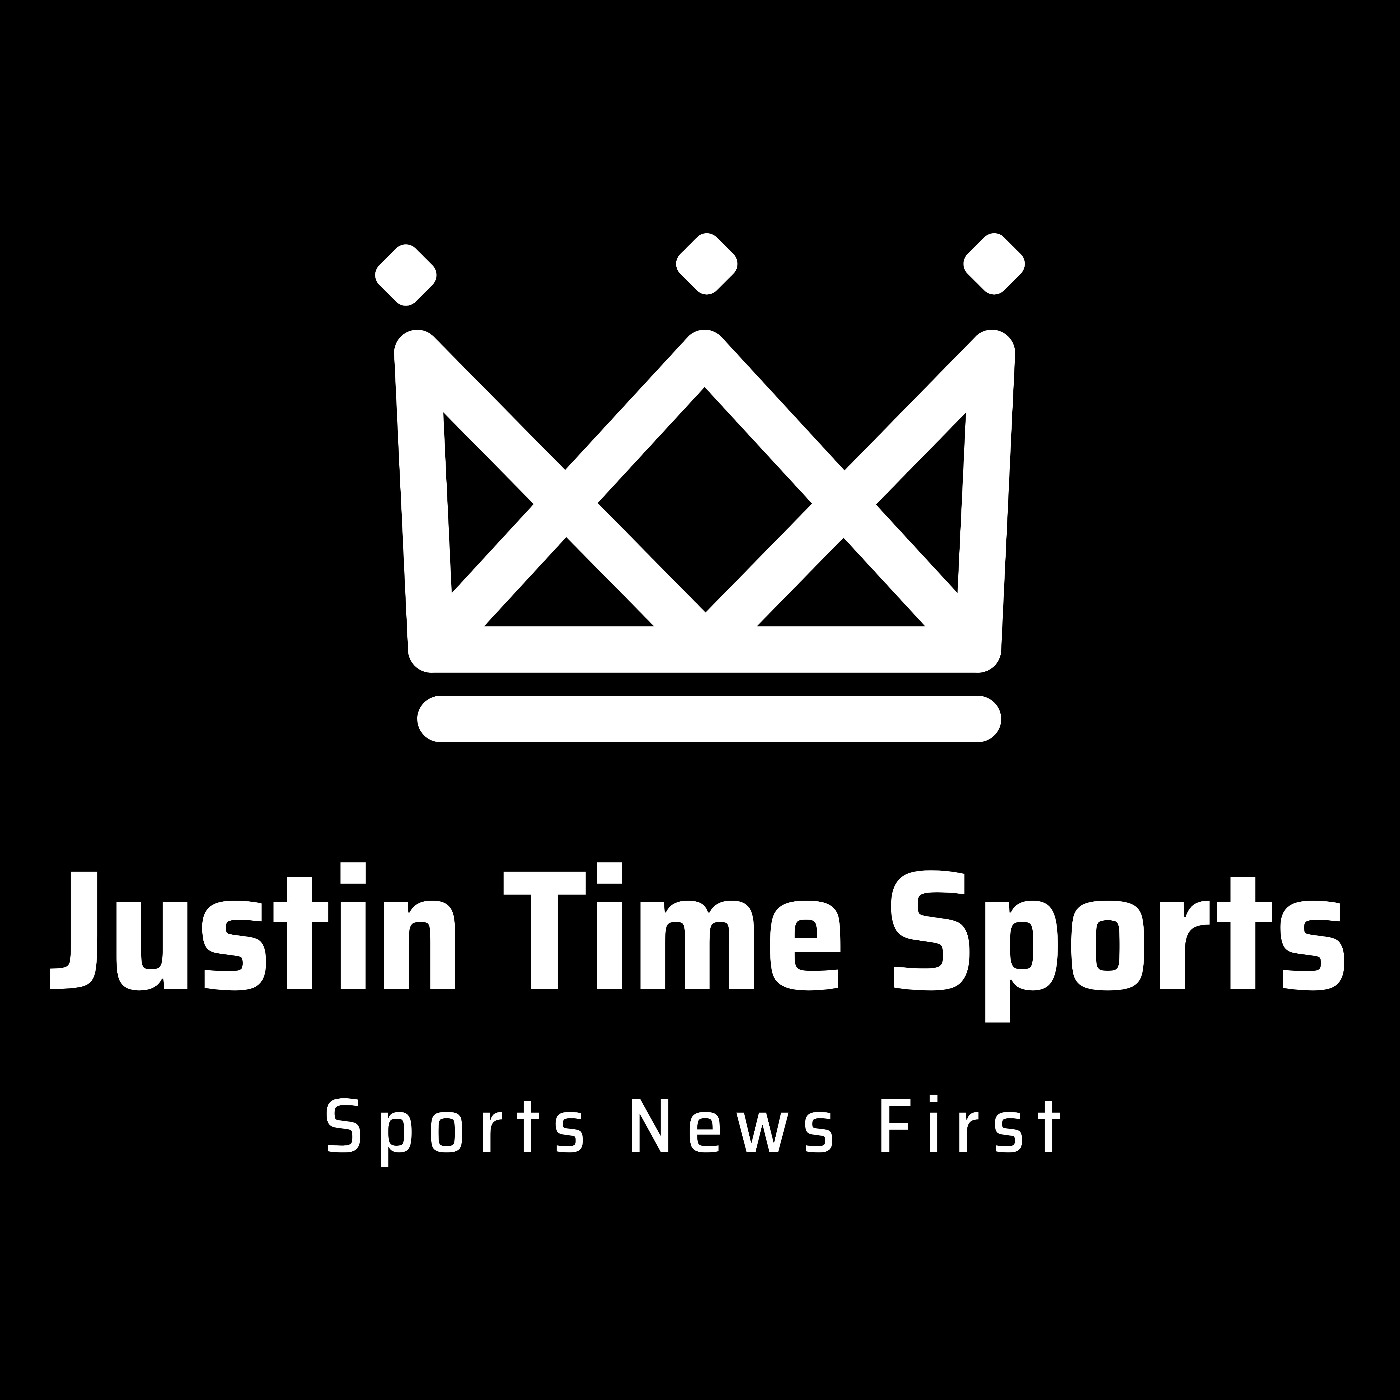 Justin Time Sports